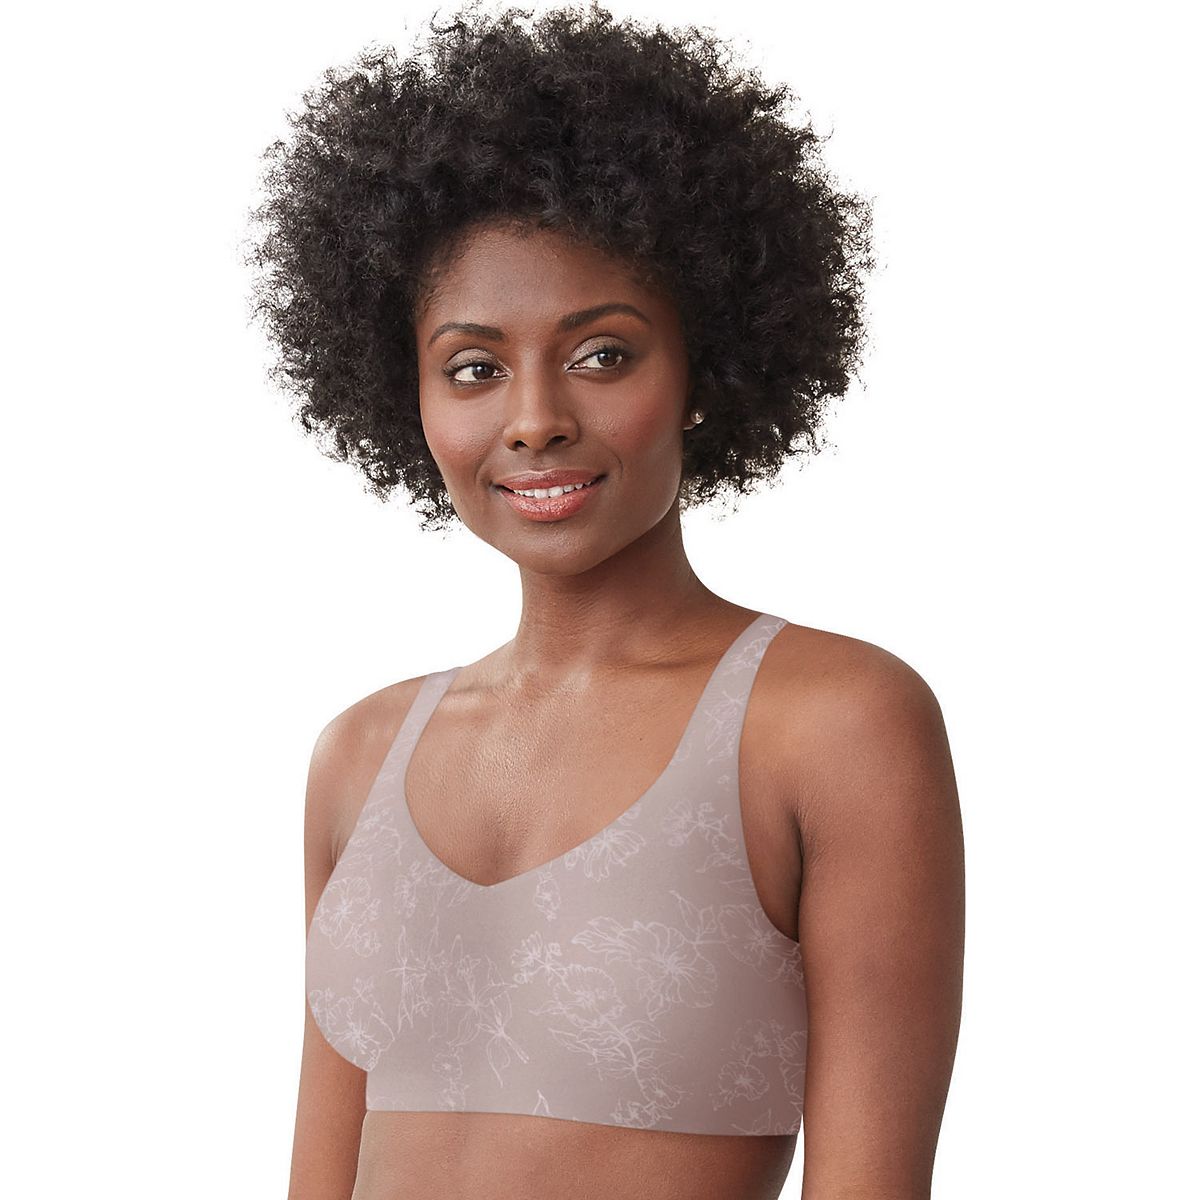 Bali Womens Comfort Revolution Eastlite With Back Close Wirefree